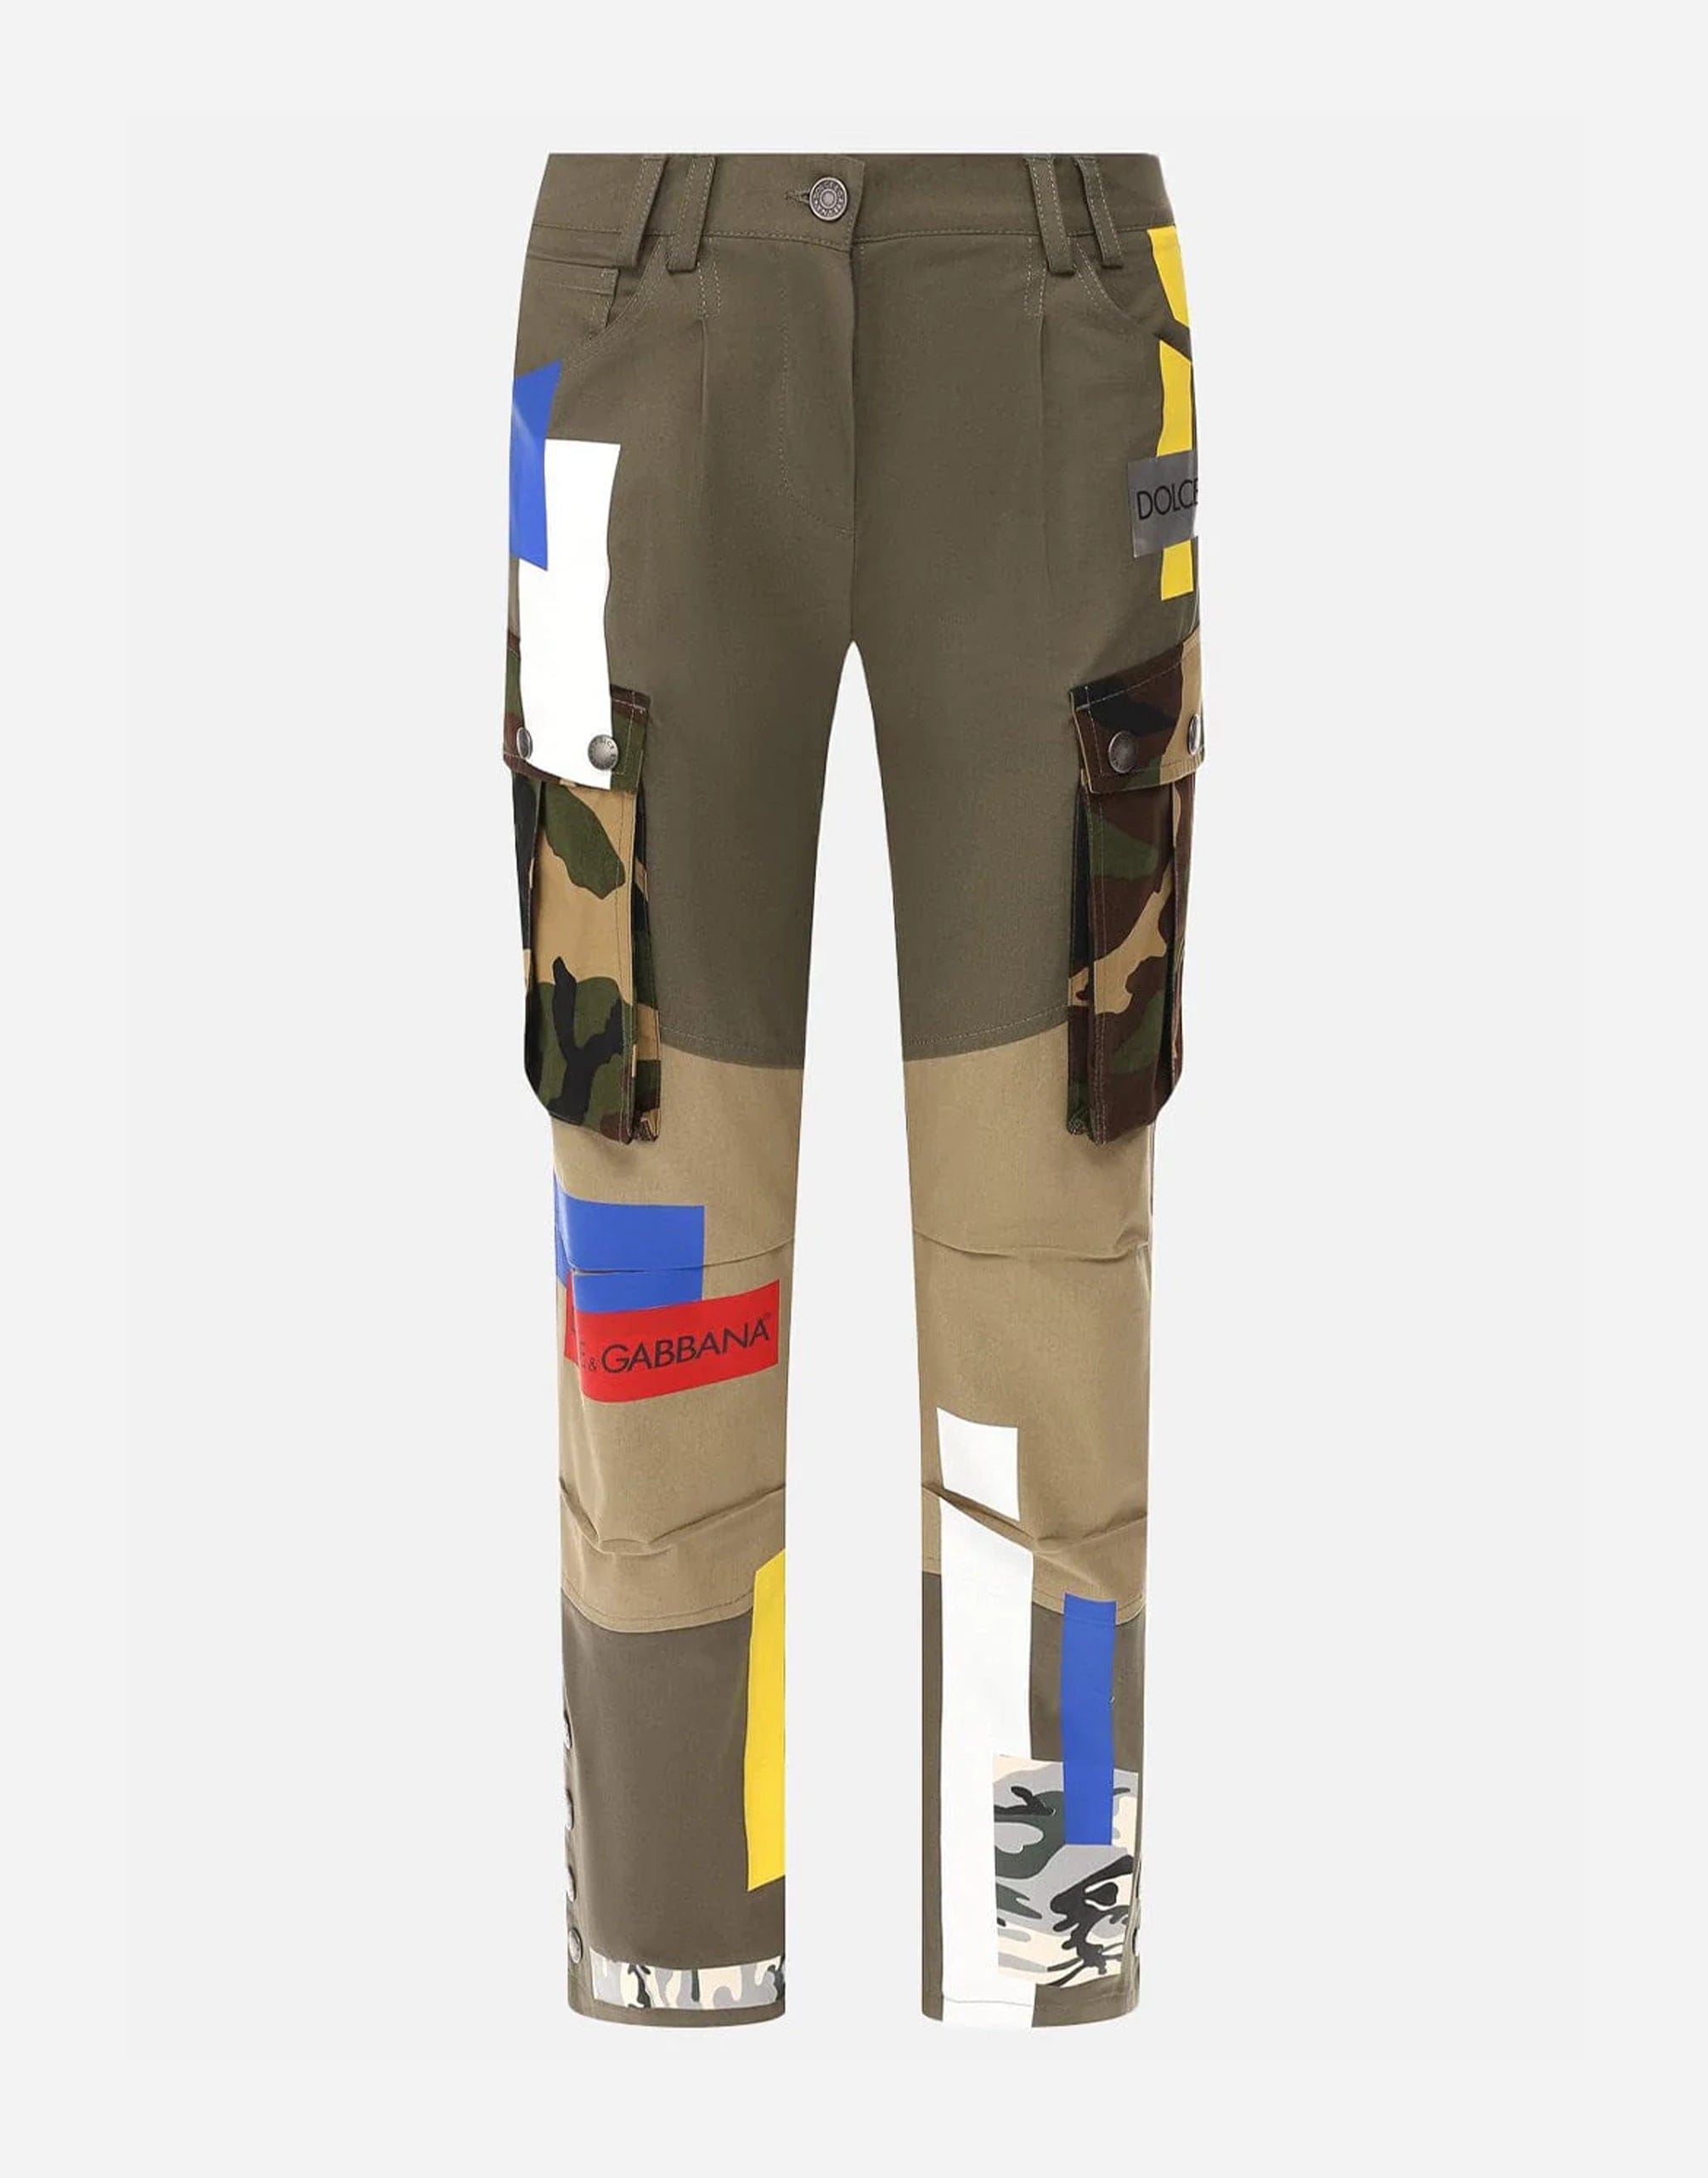 Dolce & Gabbana Patched Cargo Pants